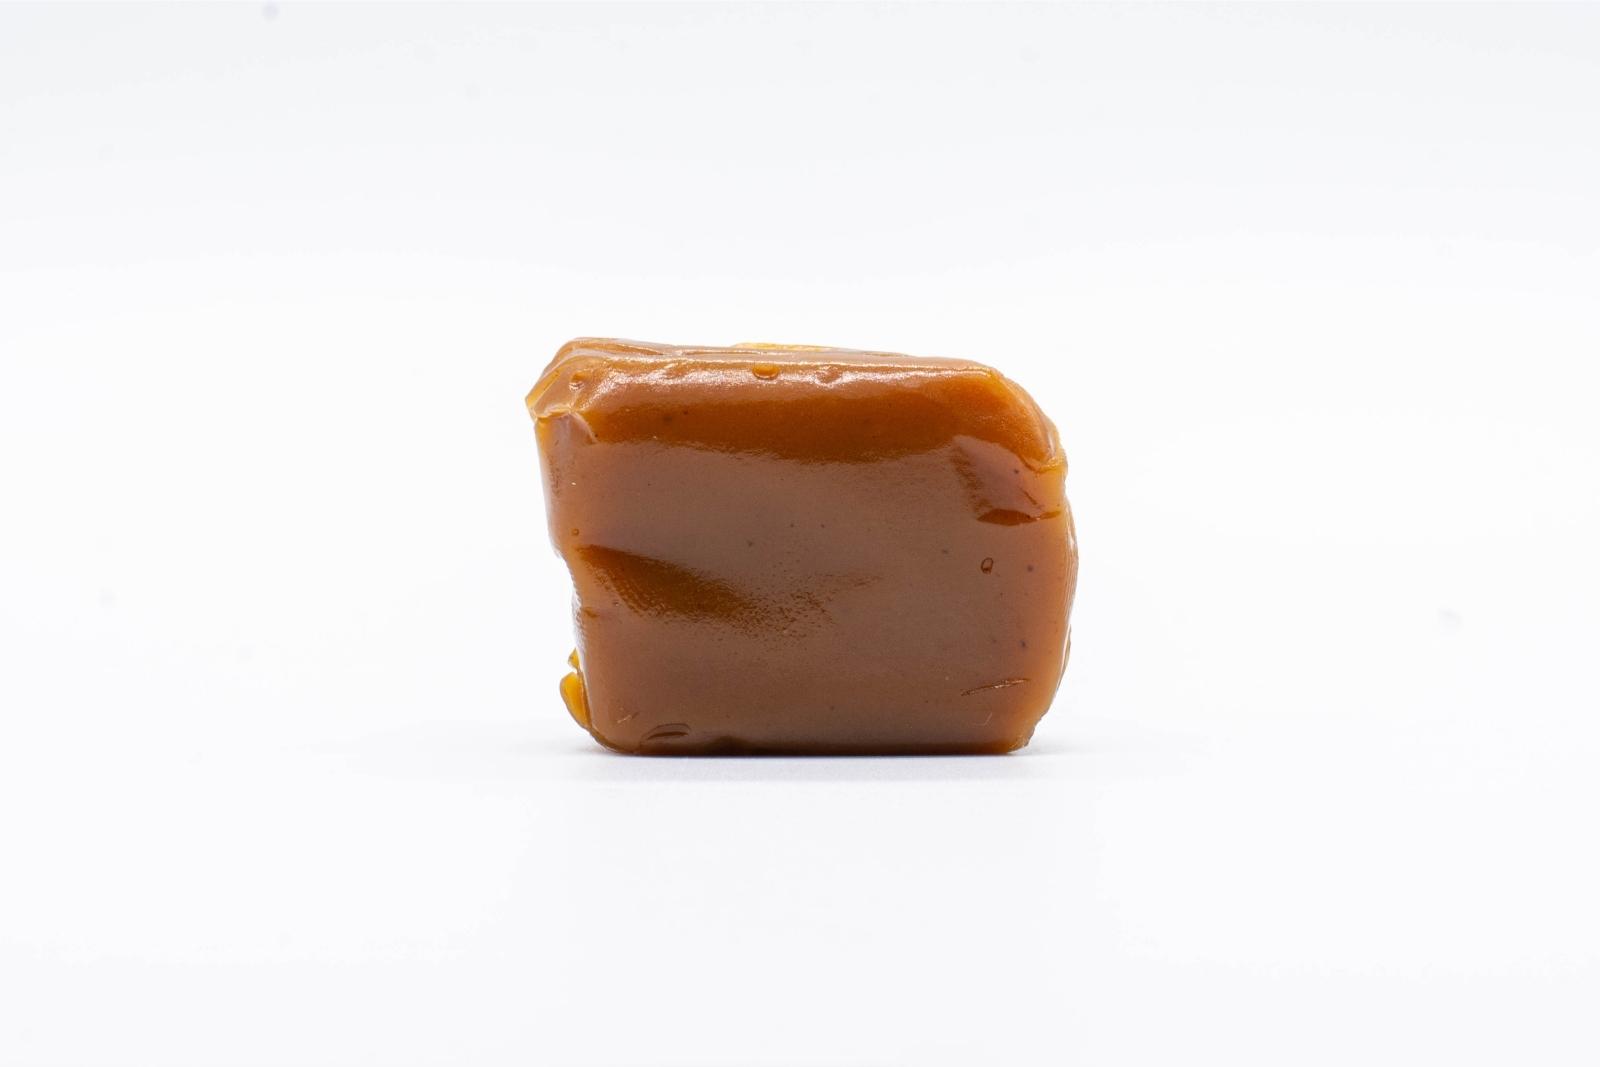 One unwrapped piece of Seventh Hill CBD's CBN Chill caramel, on a clear background